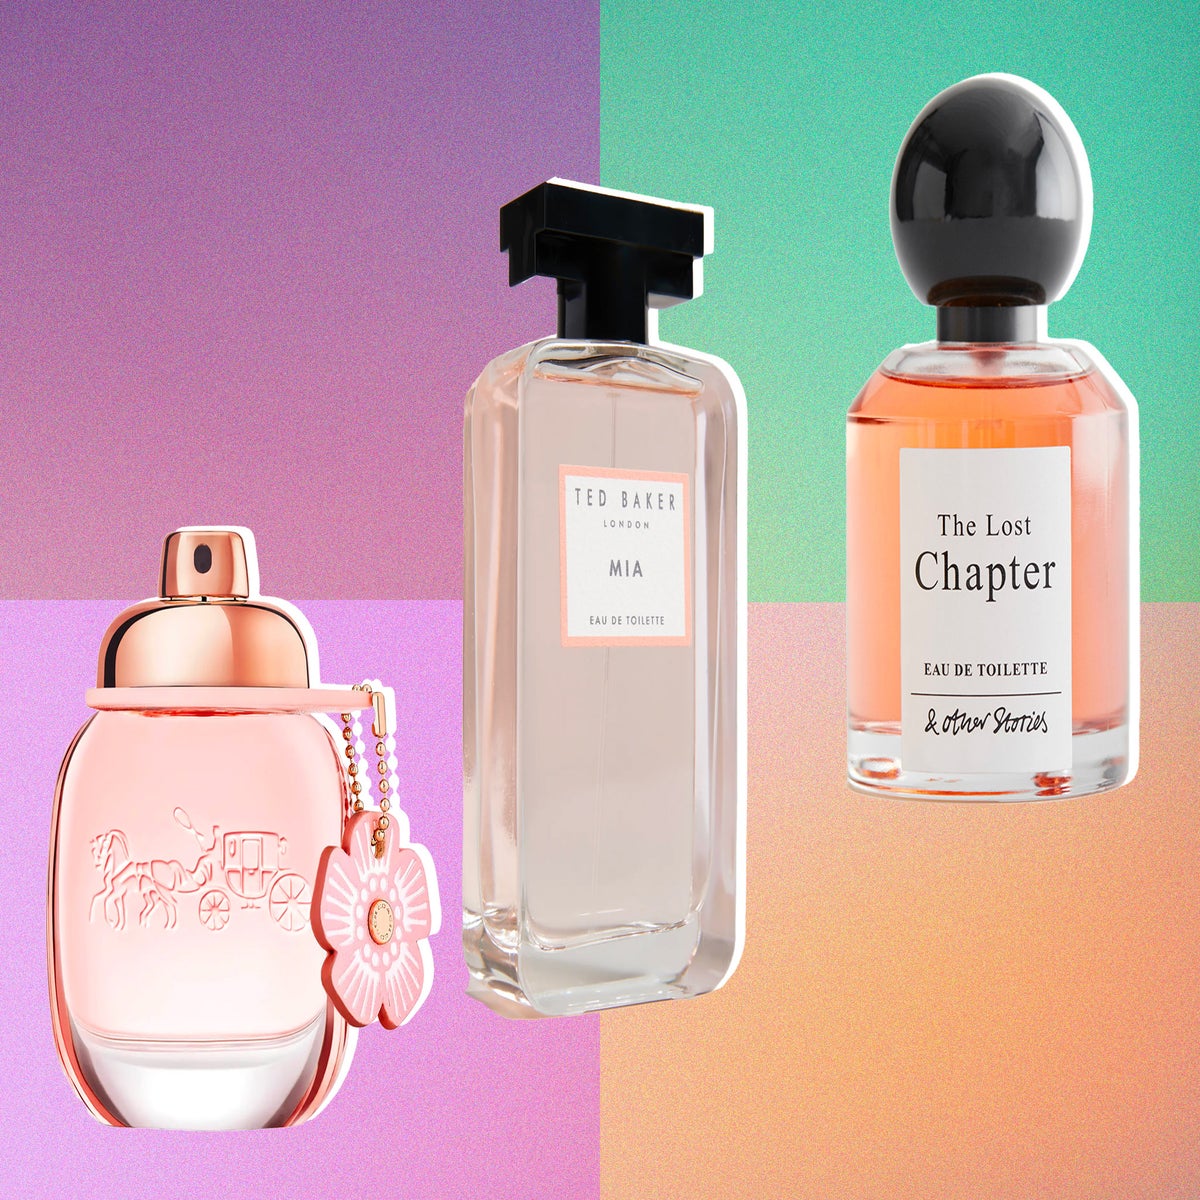 Perfume bottle design: everything you need to know to stand out